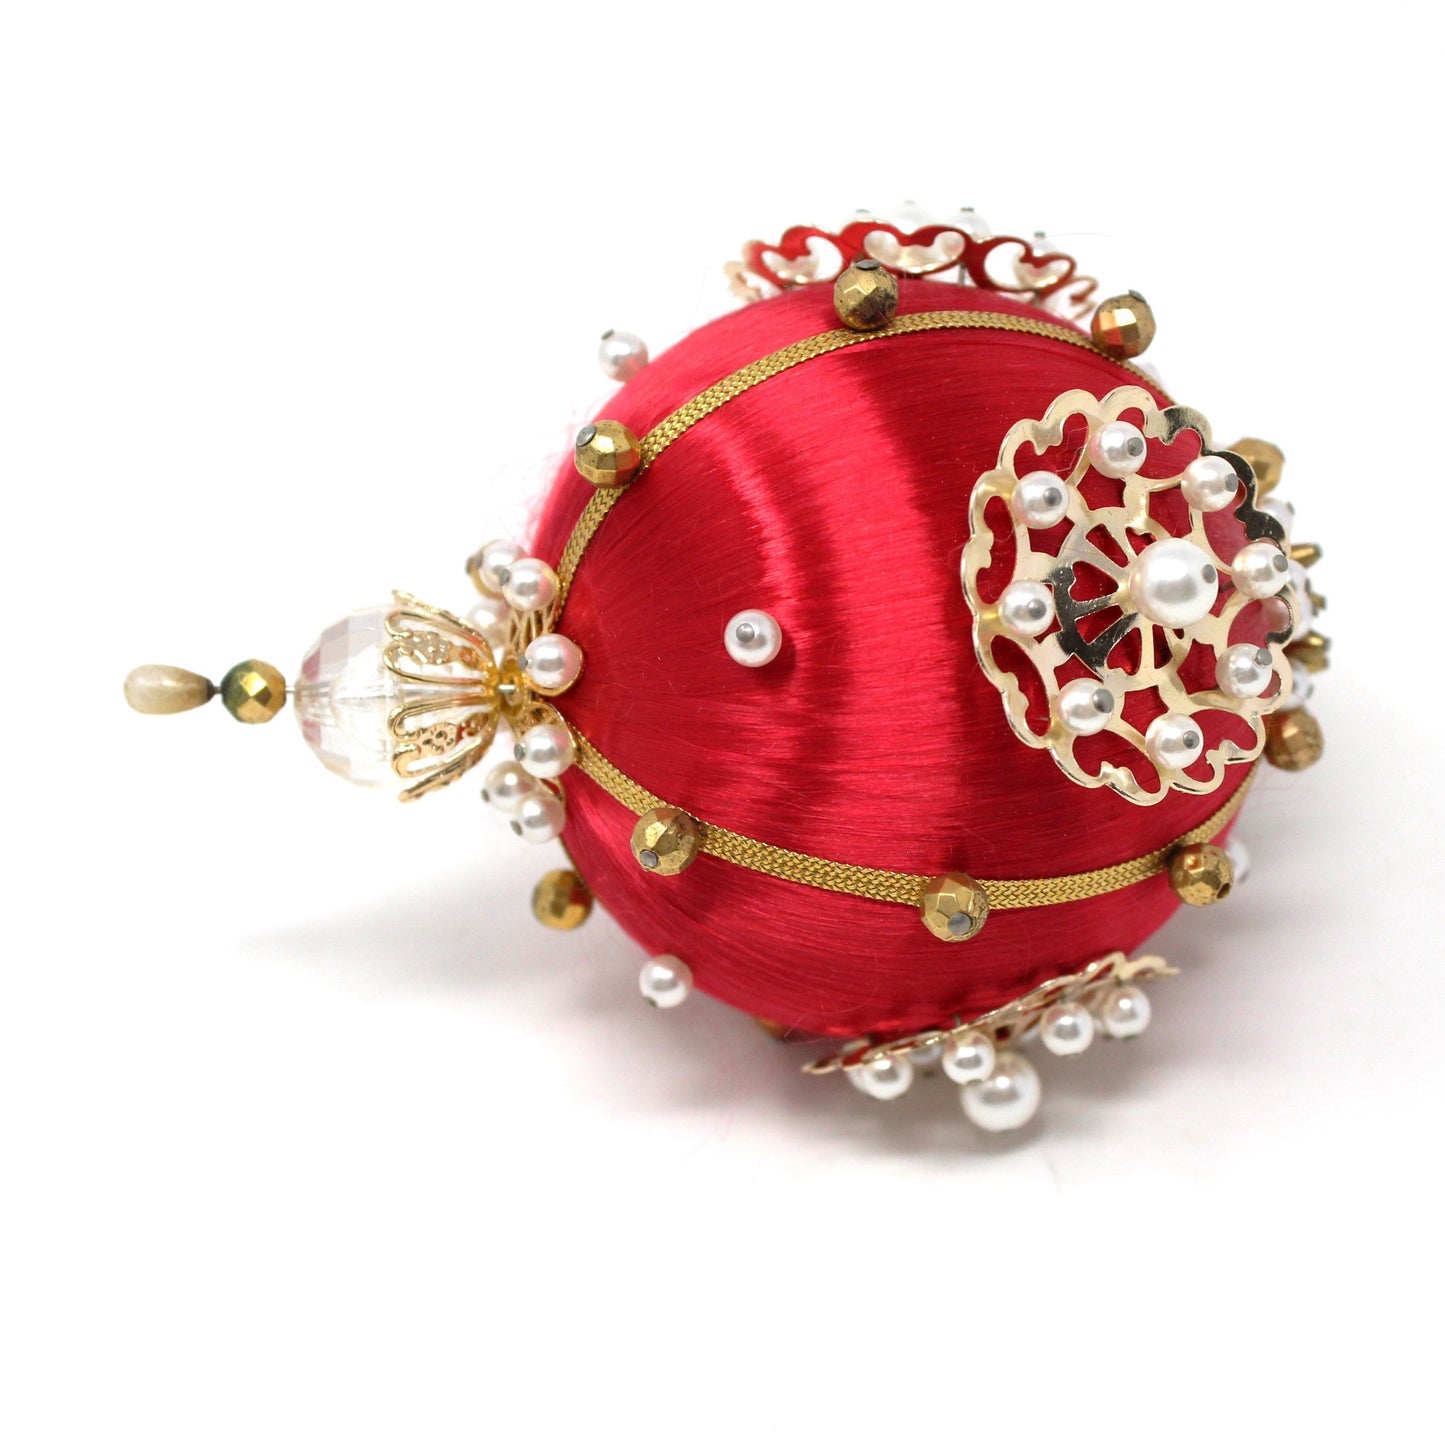 Ornament, Satin Beaded Ball, Red, Gold & White, Hand Made, Vintage